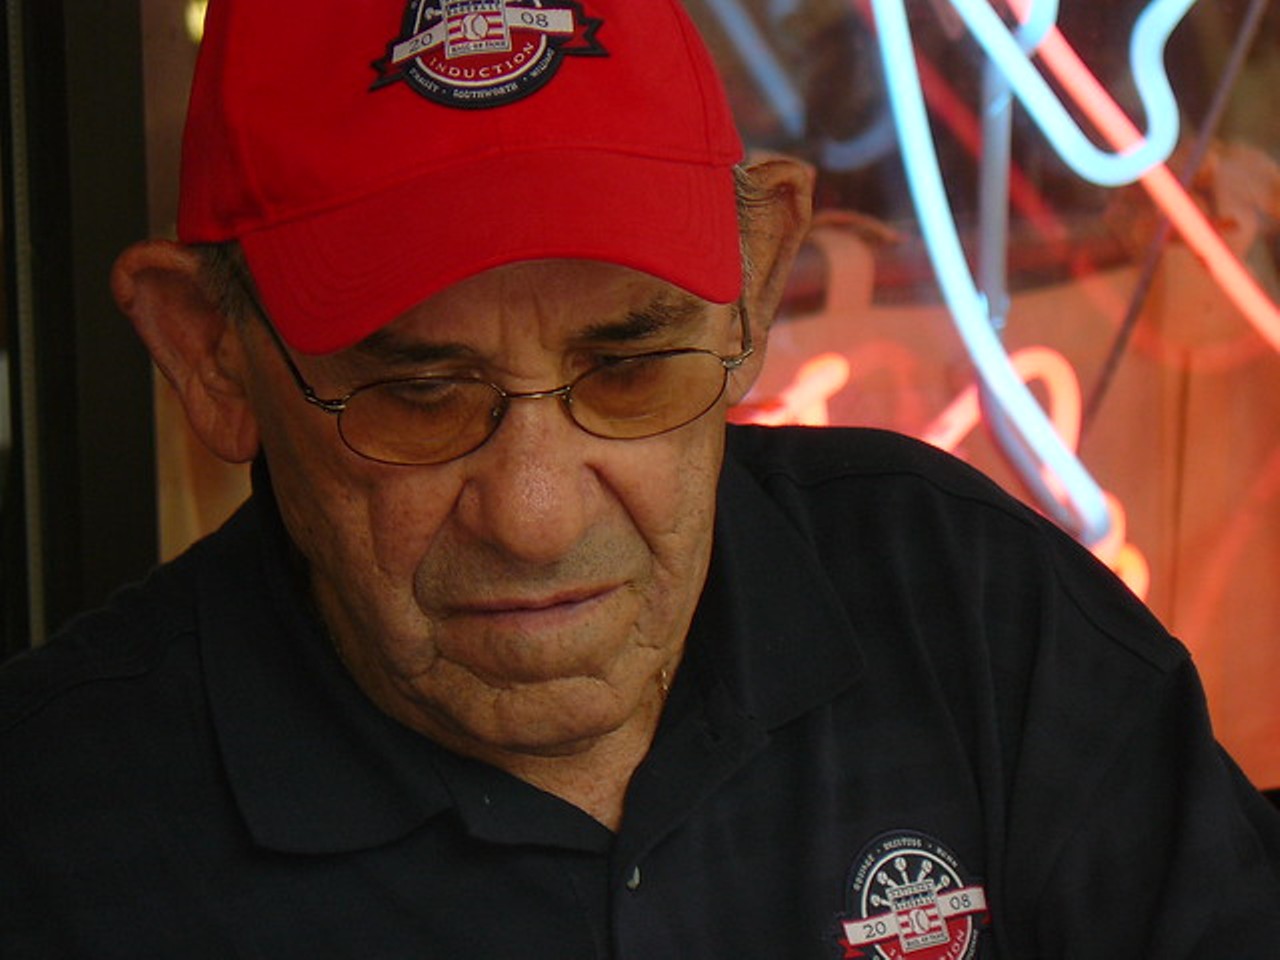 Yogi Berra
Famous baseball player, coach and one-man quote machine Yogi Berra was raised on The Hill. Although he died in 2015, he&#146;s still one of the most beloved St. Louisans of all time.
Photo credit: Bari D / Flickr